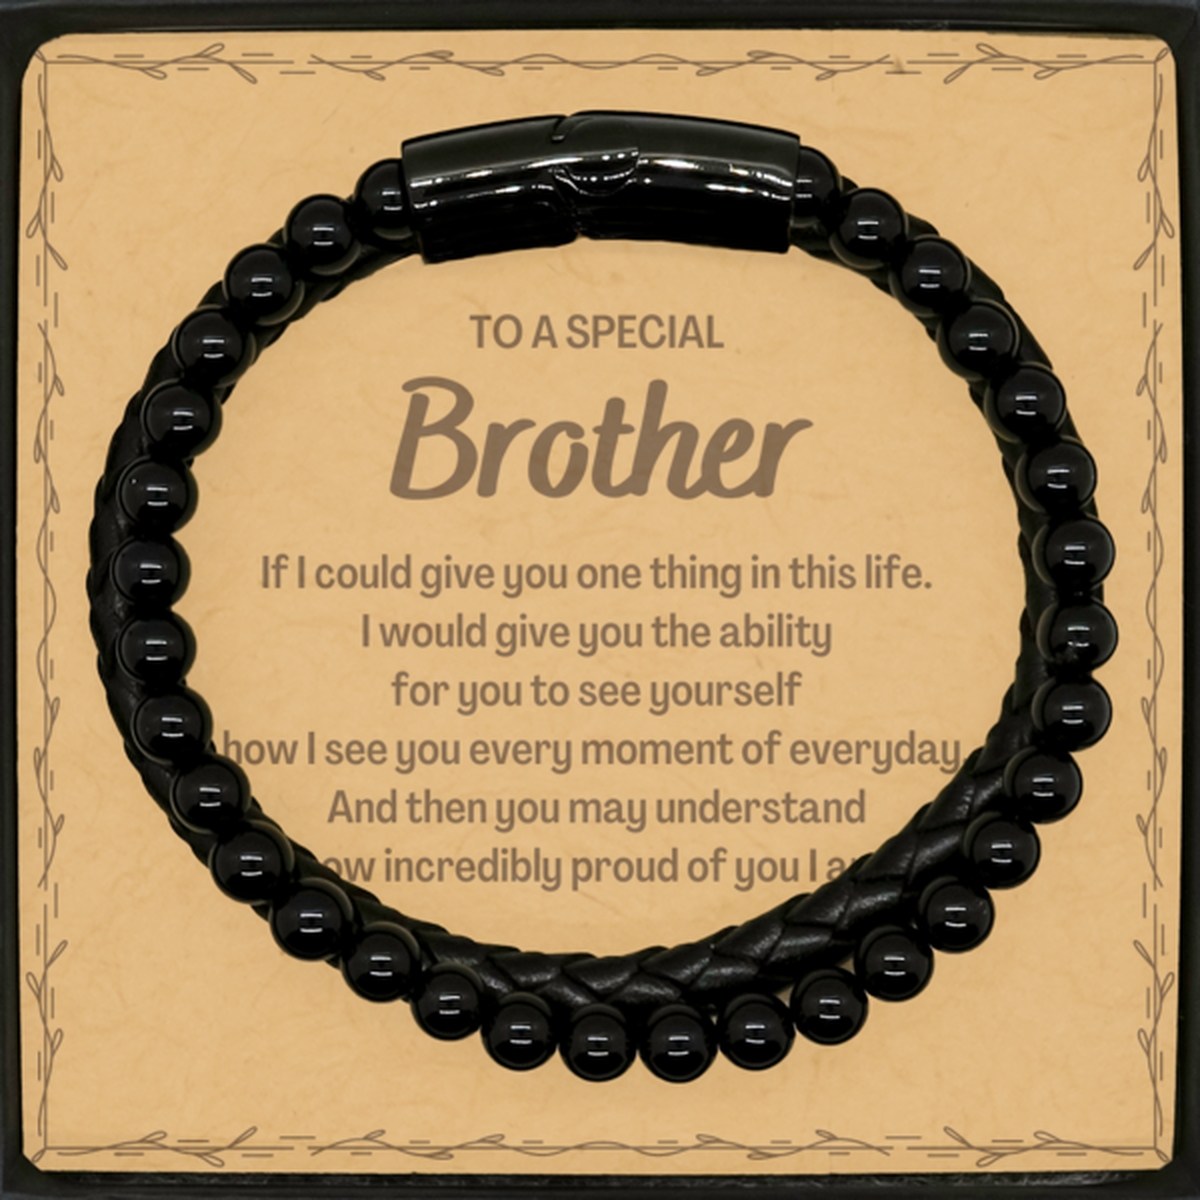 To My Brother Stone Leather Bracelets, Gifts For Brother Message Card, Inspirational Gifts for Christmas Birthday, Epic Gifts for Brother To A Special Brother how incredibly proud of you I am